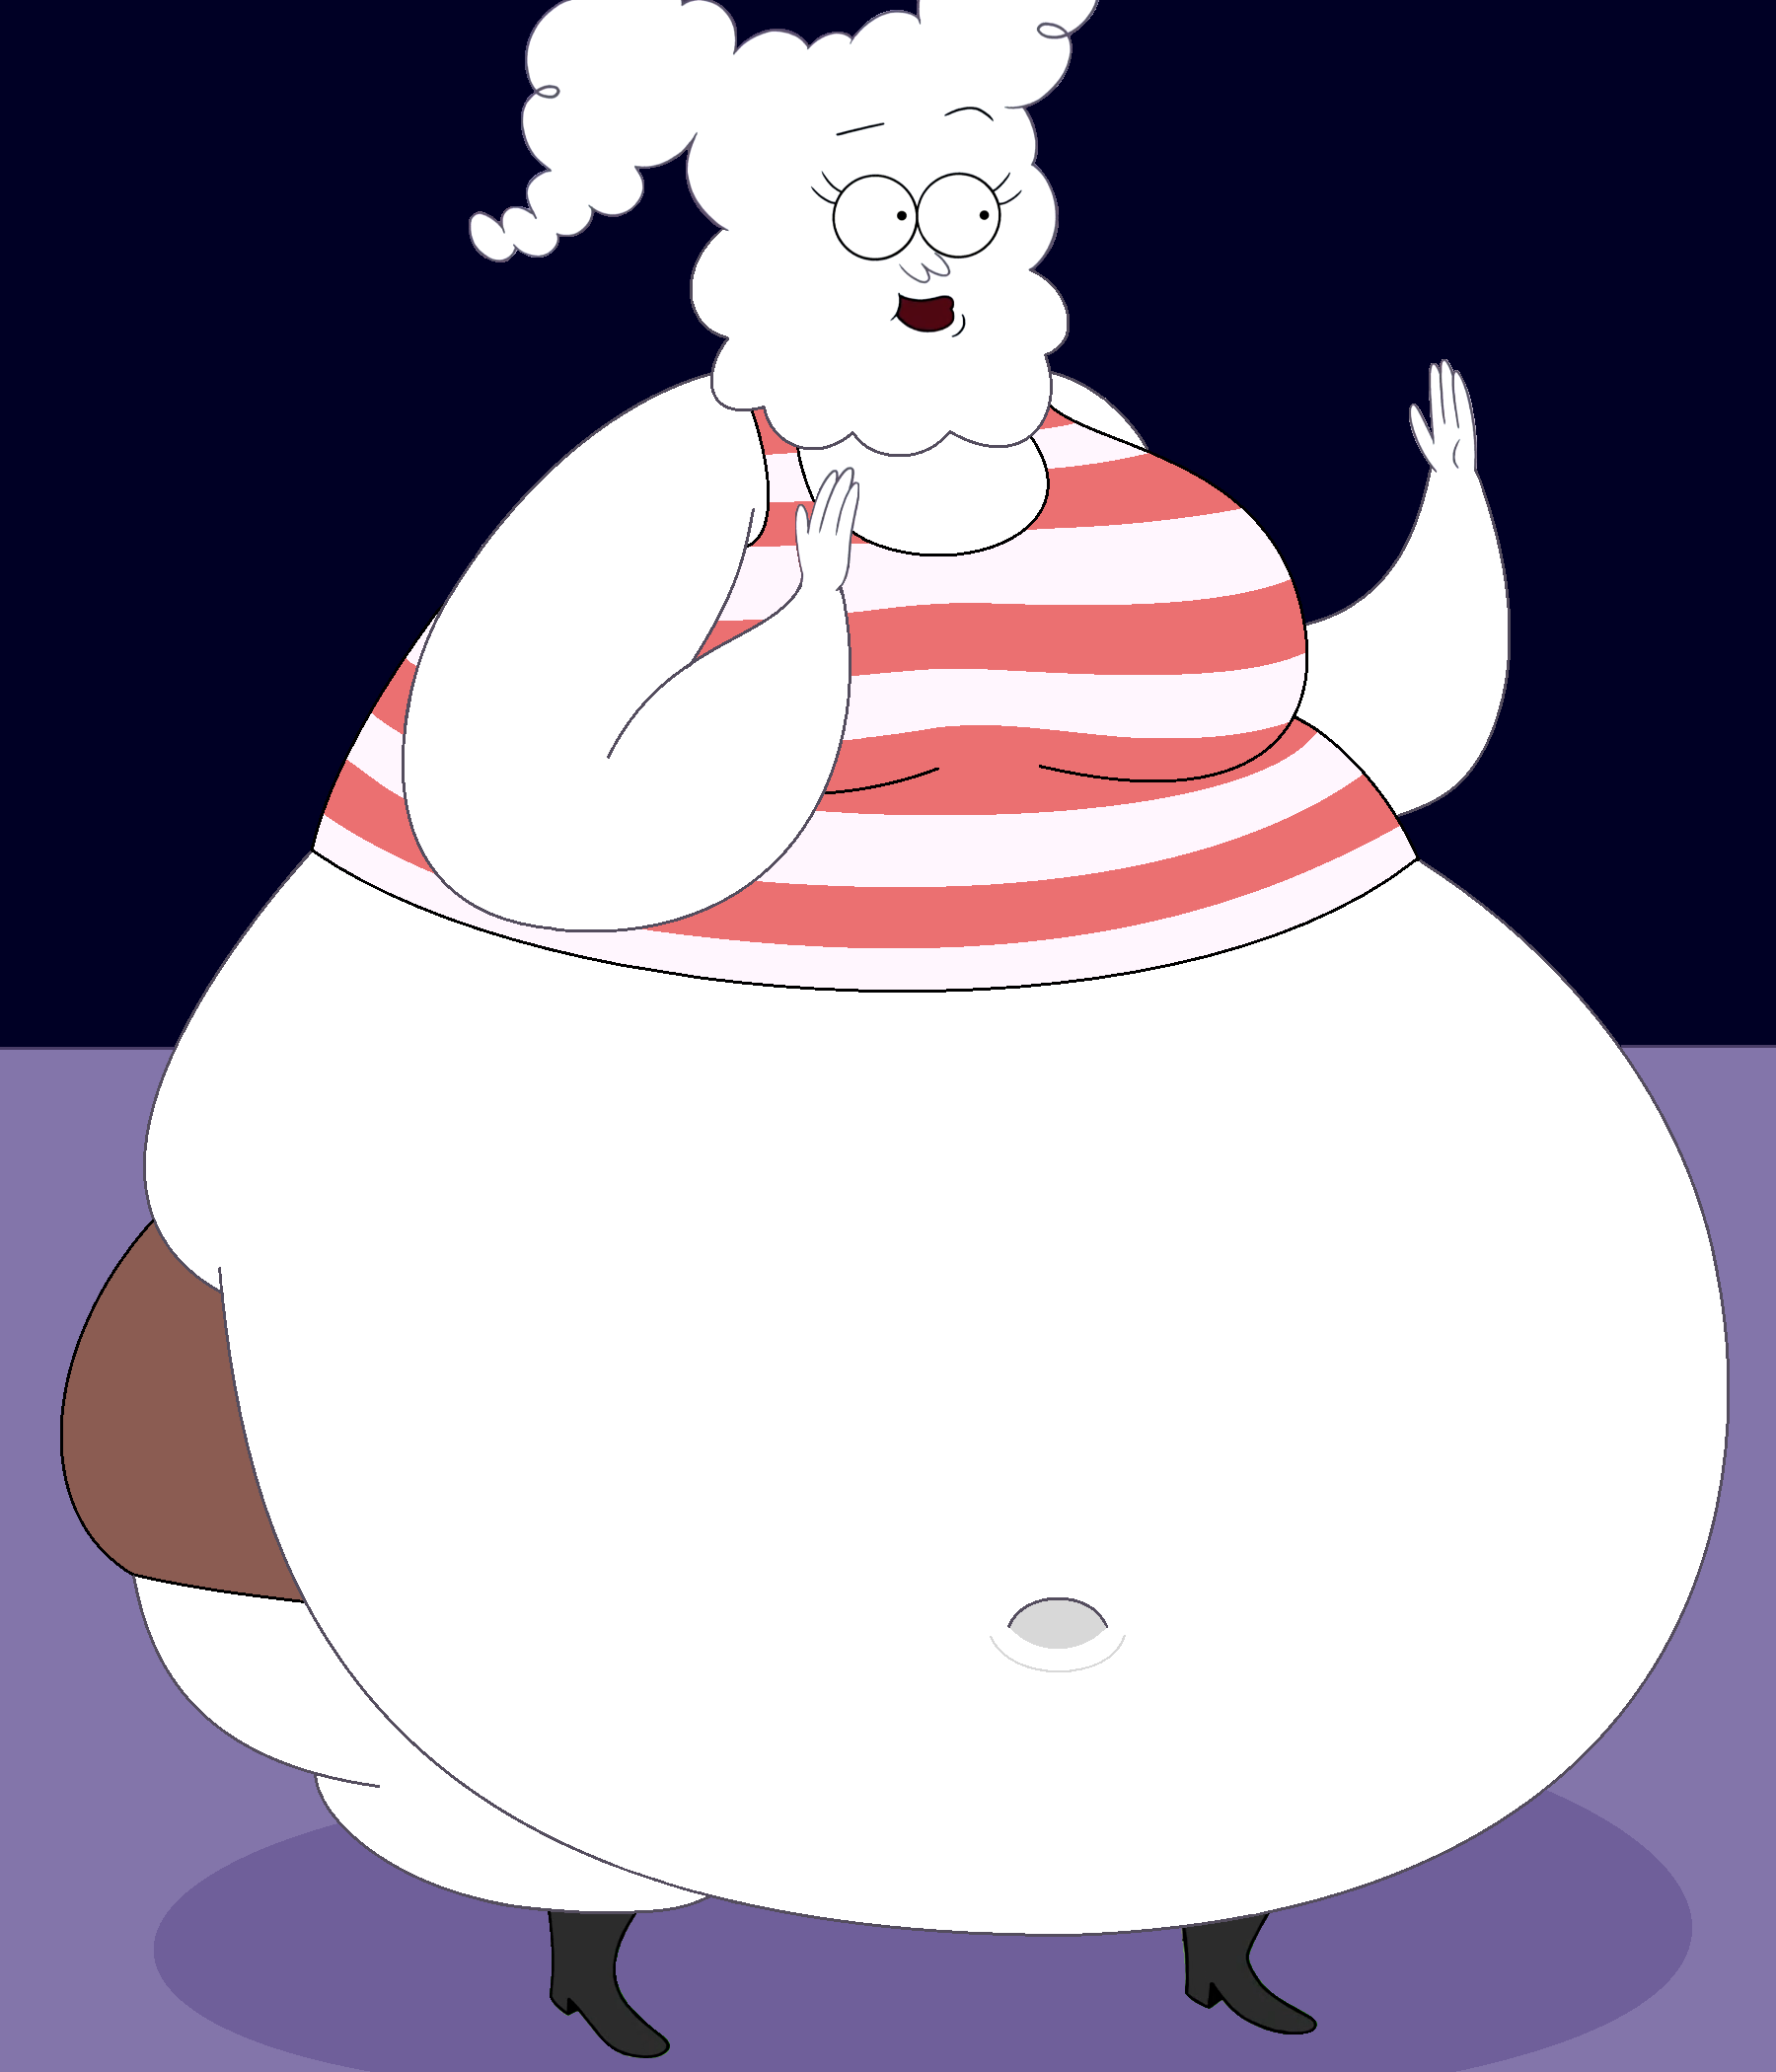 Complete Cj Is Very Fat Round And Chubby By Roquemi On Deviantart